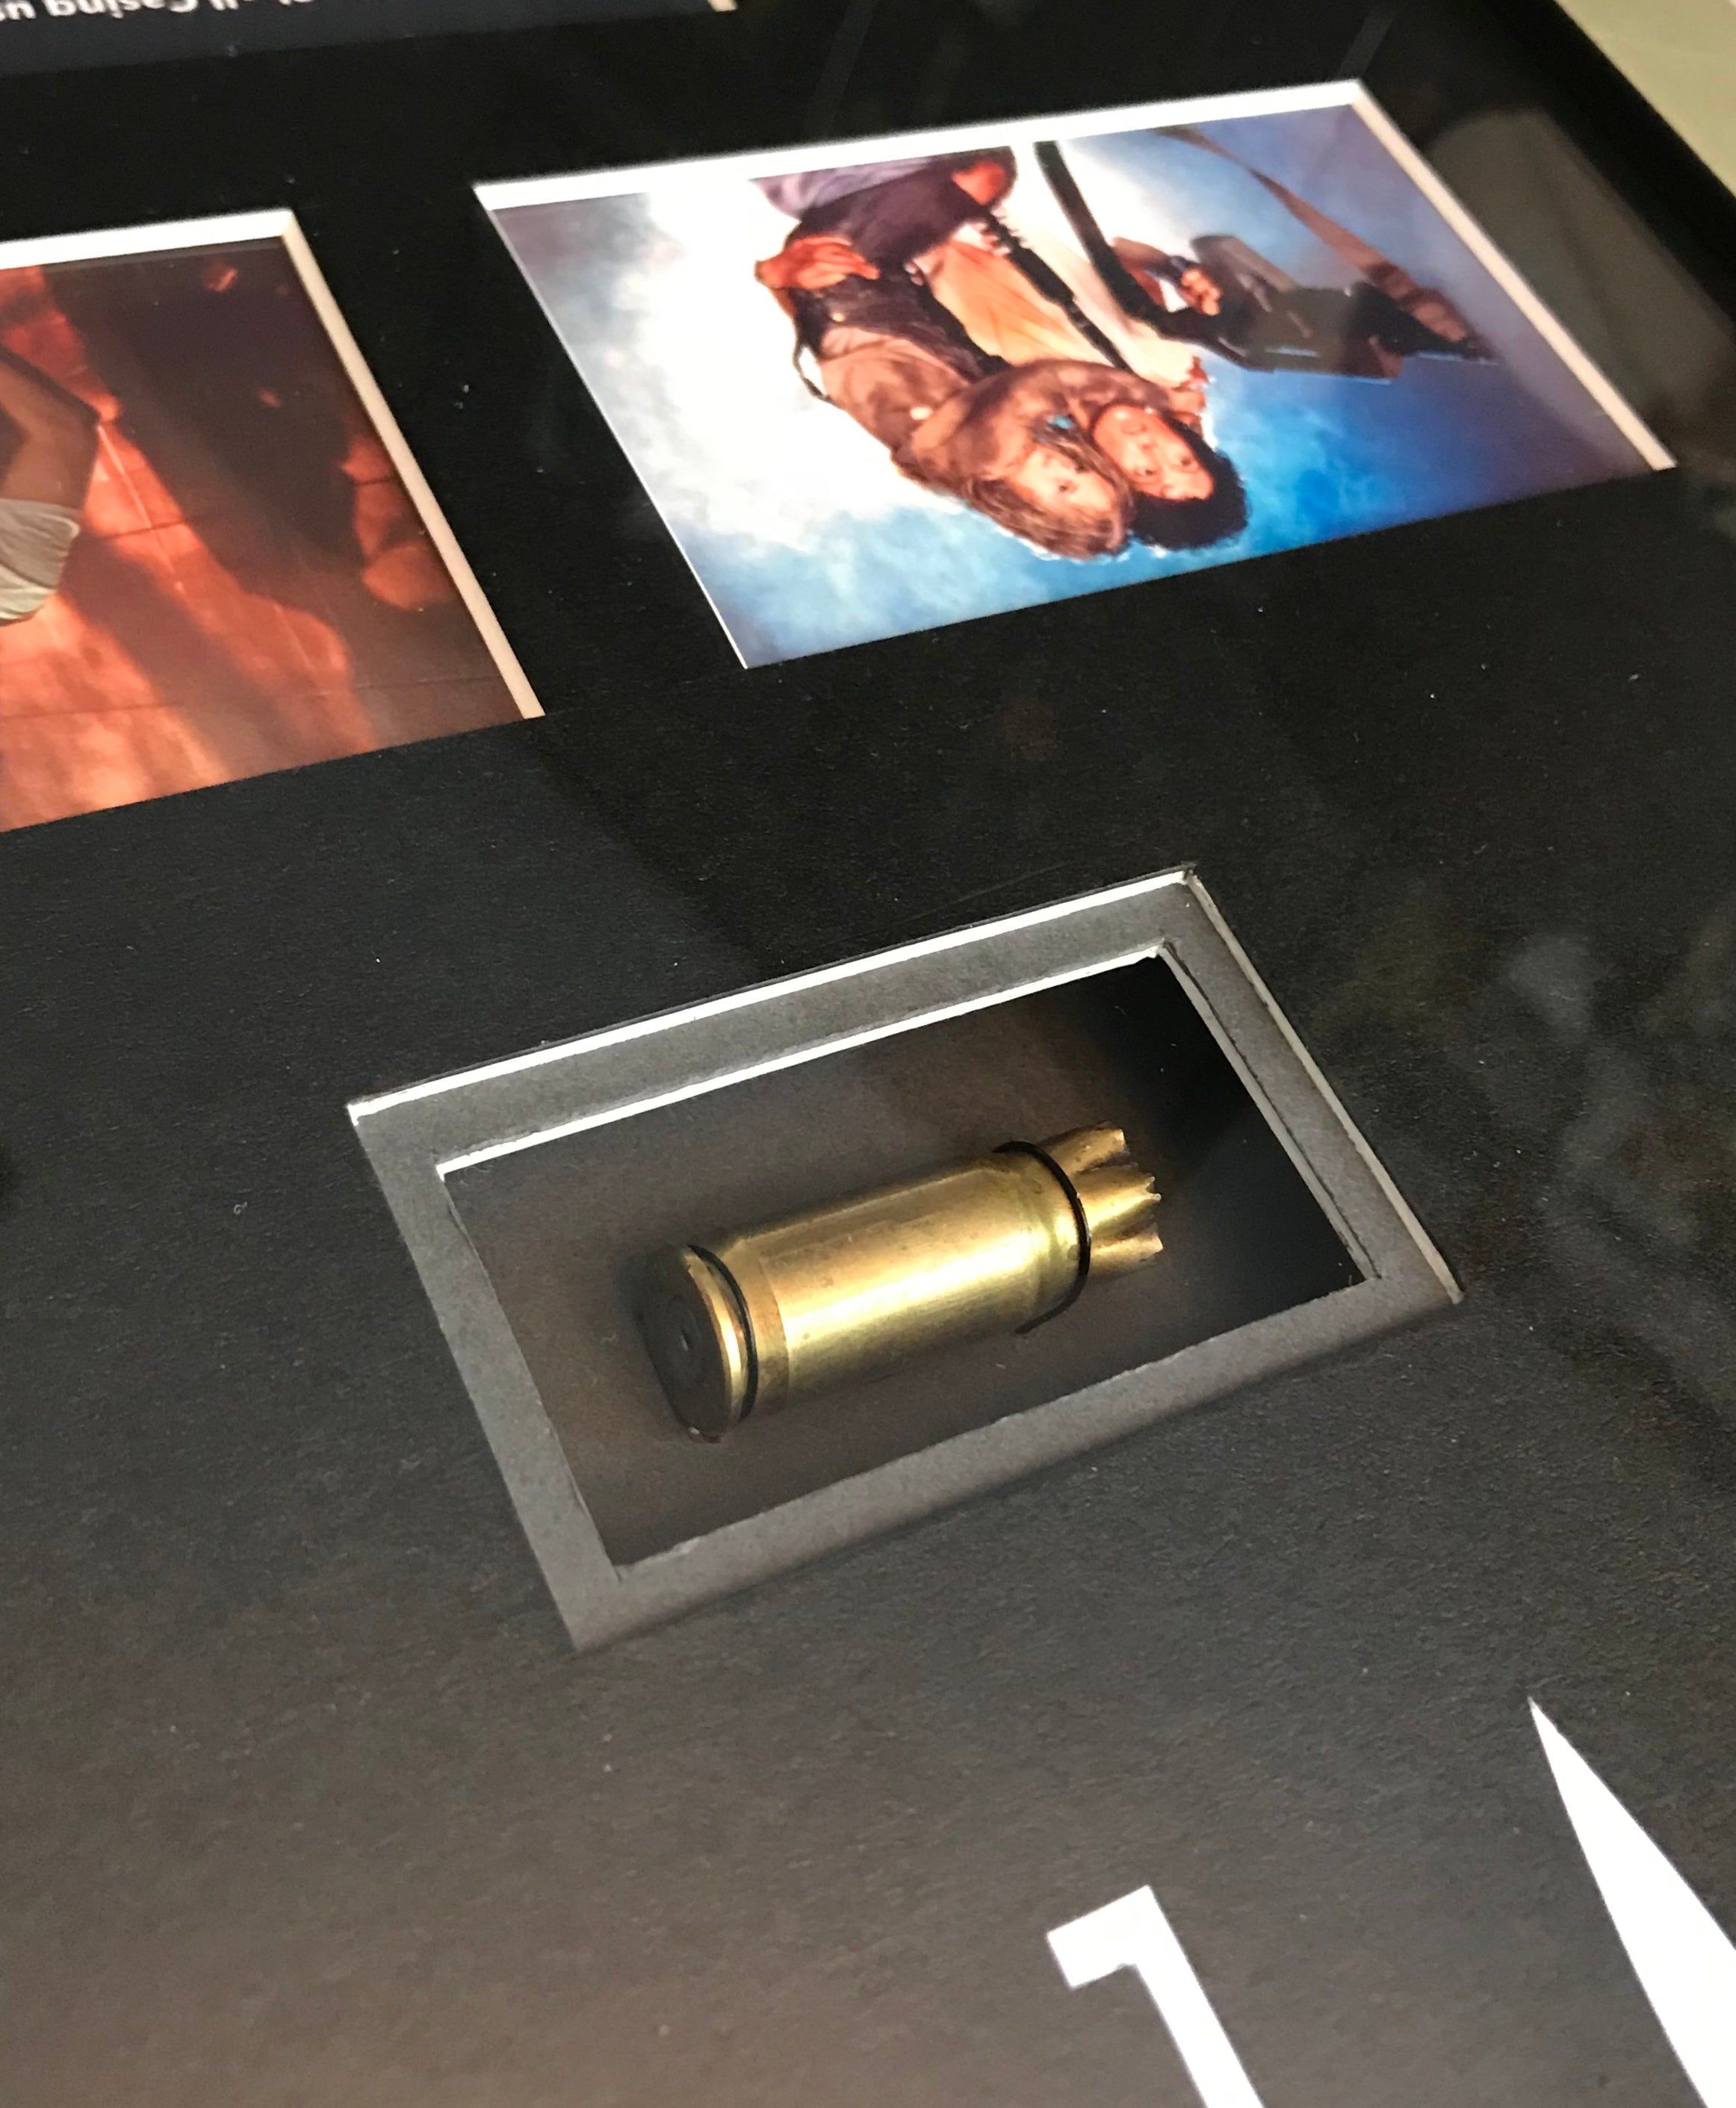 Aliens (1986) - A Pulse Rifle Shell Casing used in the Film - (SOLD)